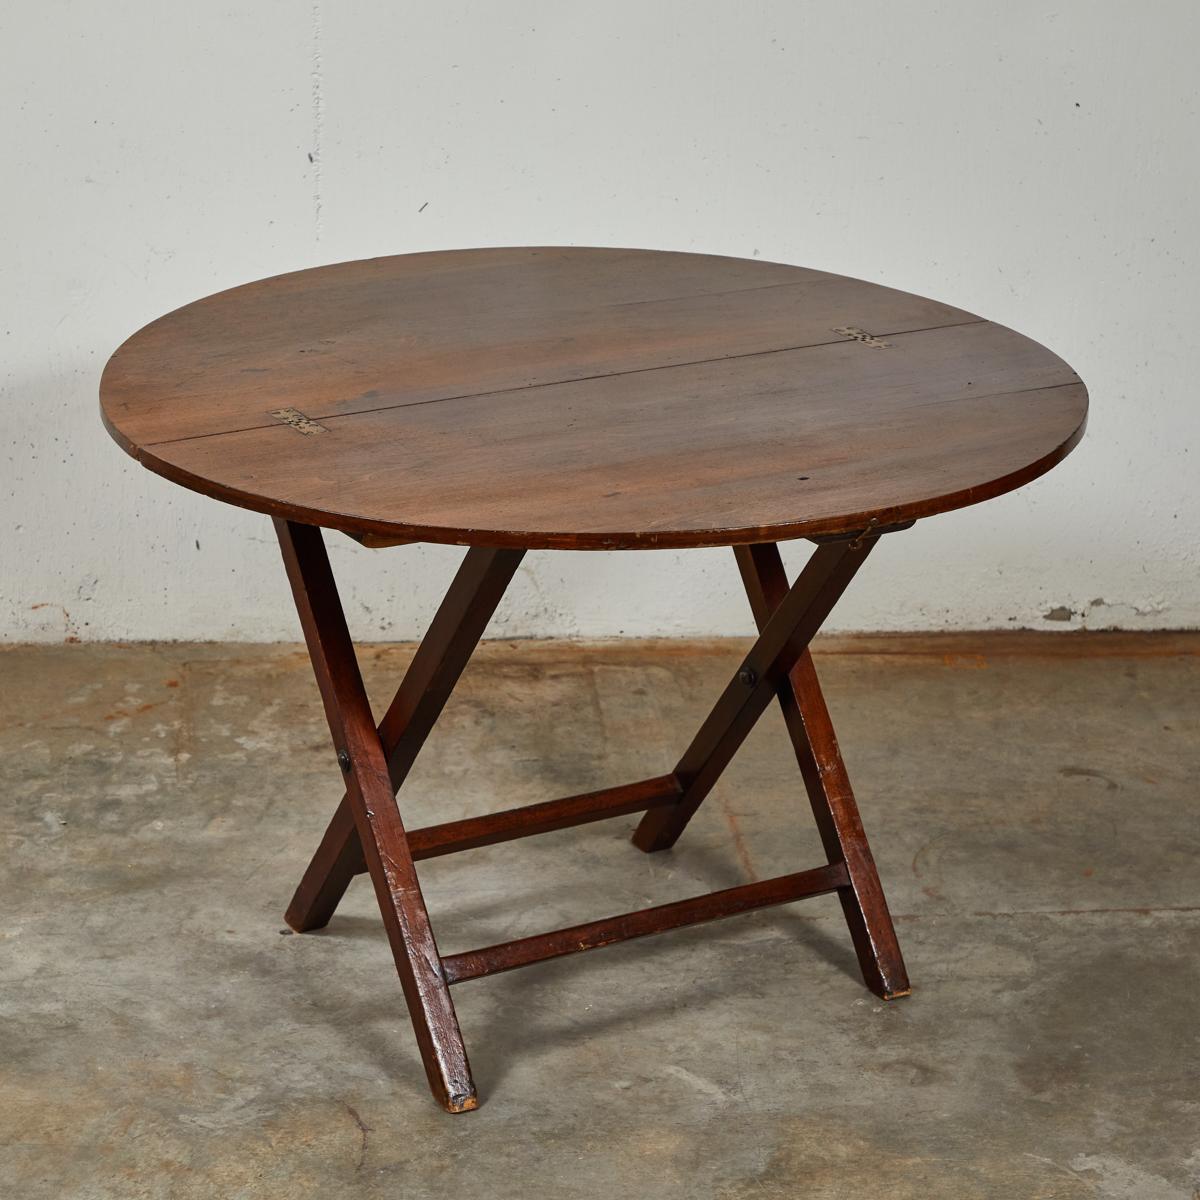 19th Century English mahogany folding coaching / campaign table; the round mahogany top, supported on X-shaped supports, with turned stretchers. Great use for a small dining table, coffee table, game table or side table.